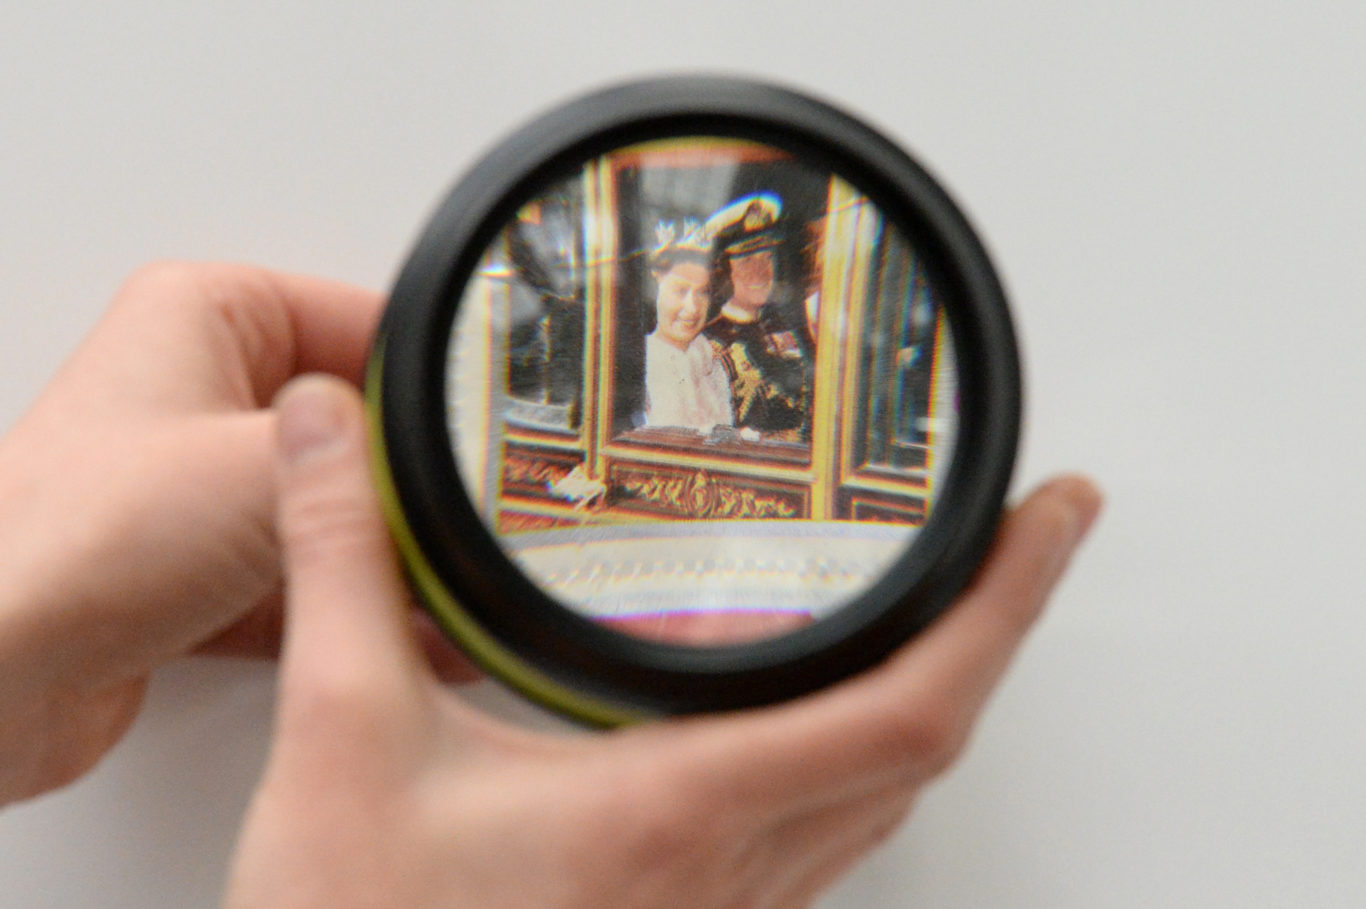 A visitor looks at a Silver Jubilee stamp through a magnifying glass (Kirsty O'Connor/PA)